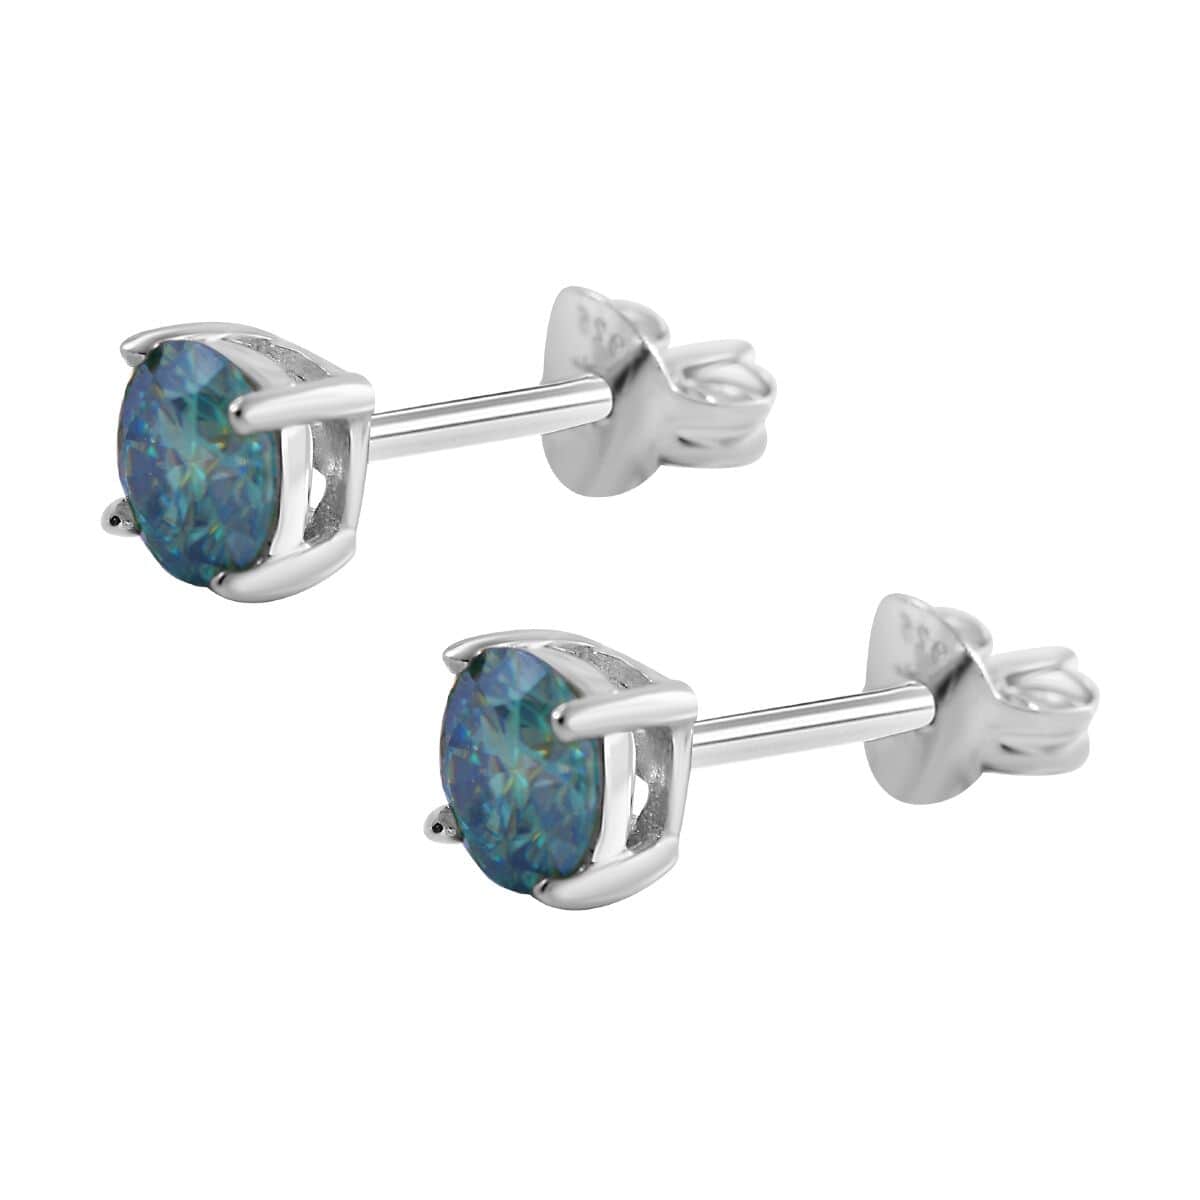 Blue and White Moissanite 2.40 ctw Floral Ring (Size 9.0) and Stud Earrings in Platinum Over Sterling Silver image number 4